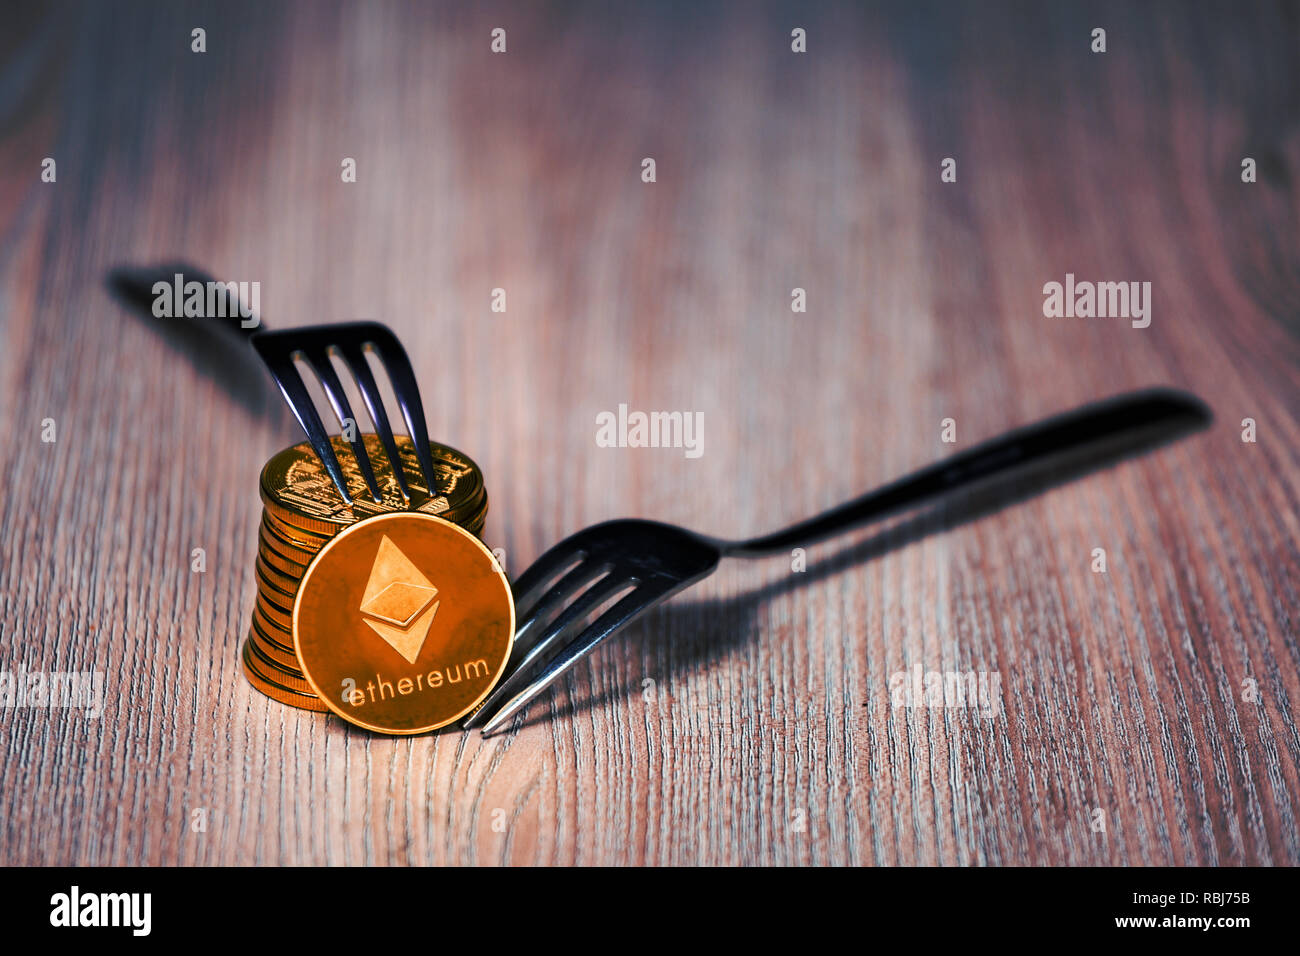 Stack of Ethereum cryptocurrency hard fork concept Stock Photo